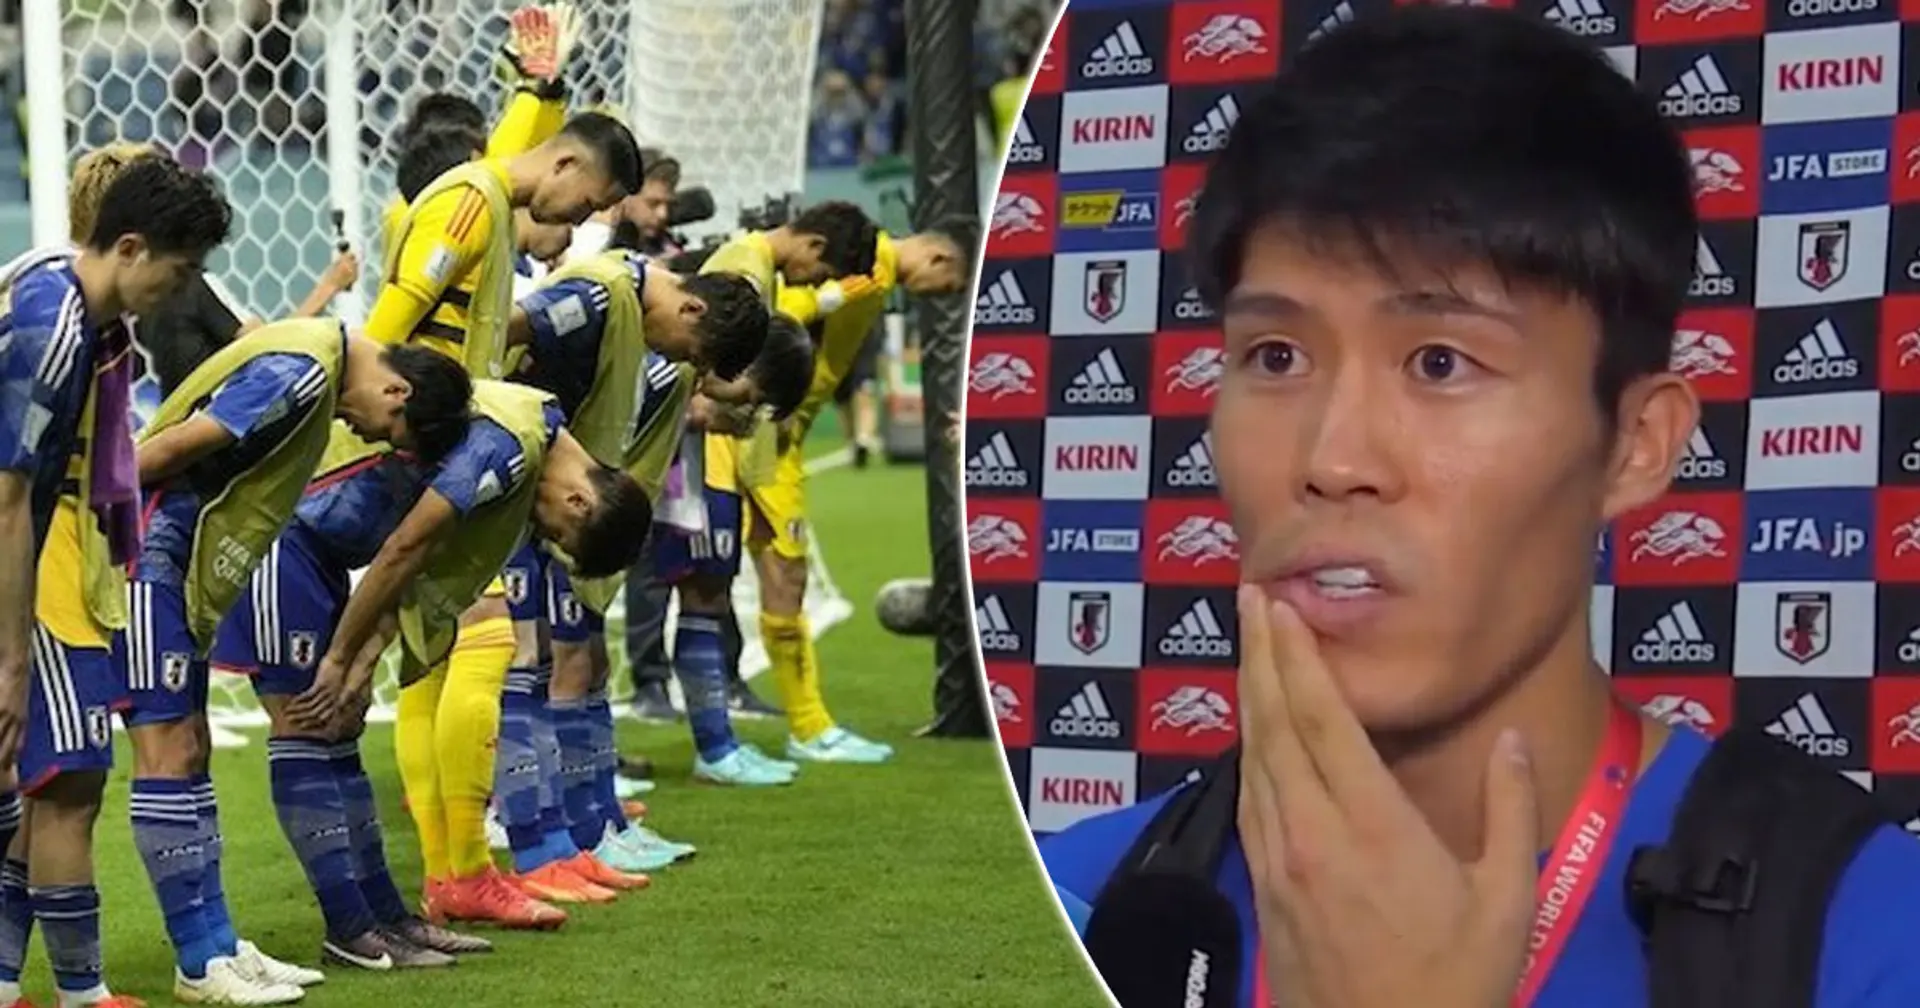 'I need time to forget about football': Tomiyasu sends heartbreaking message after Japan's World Cup exit